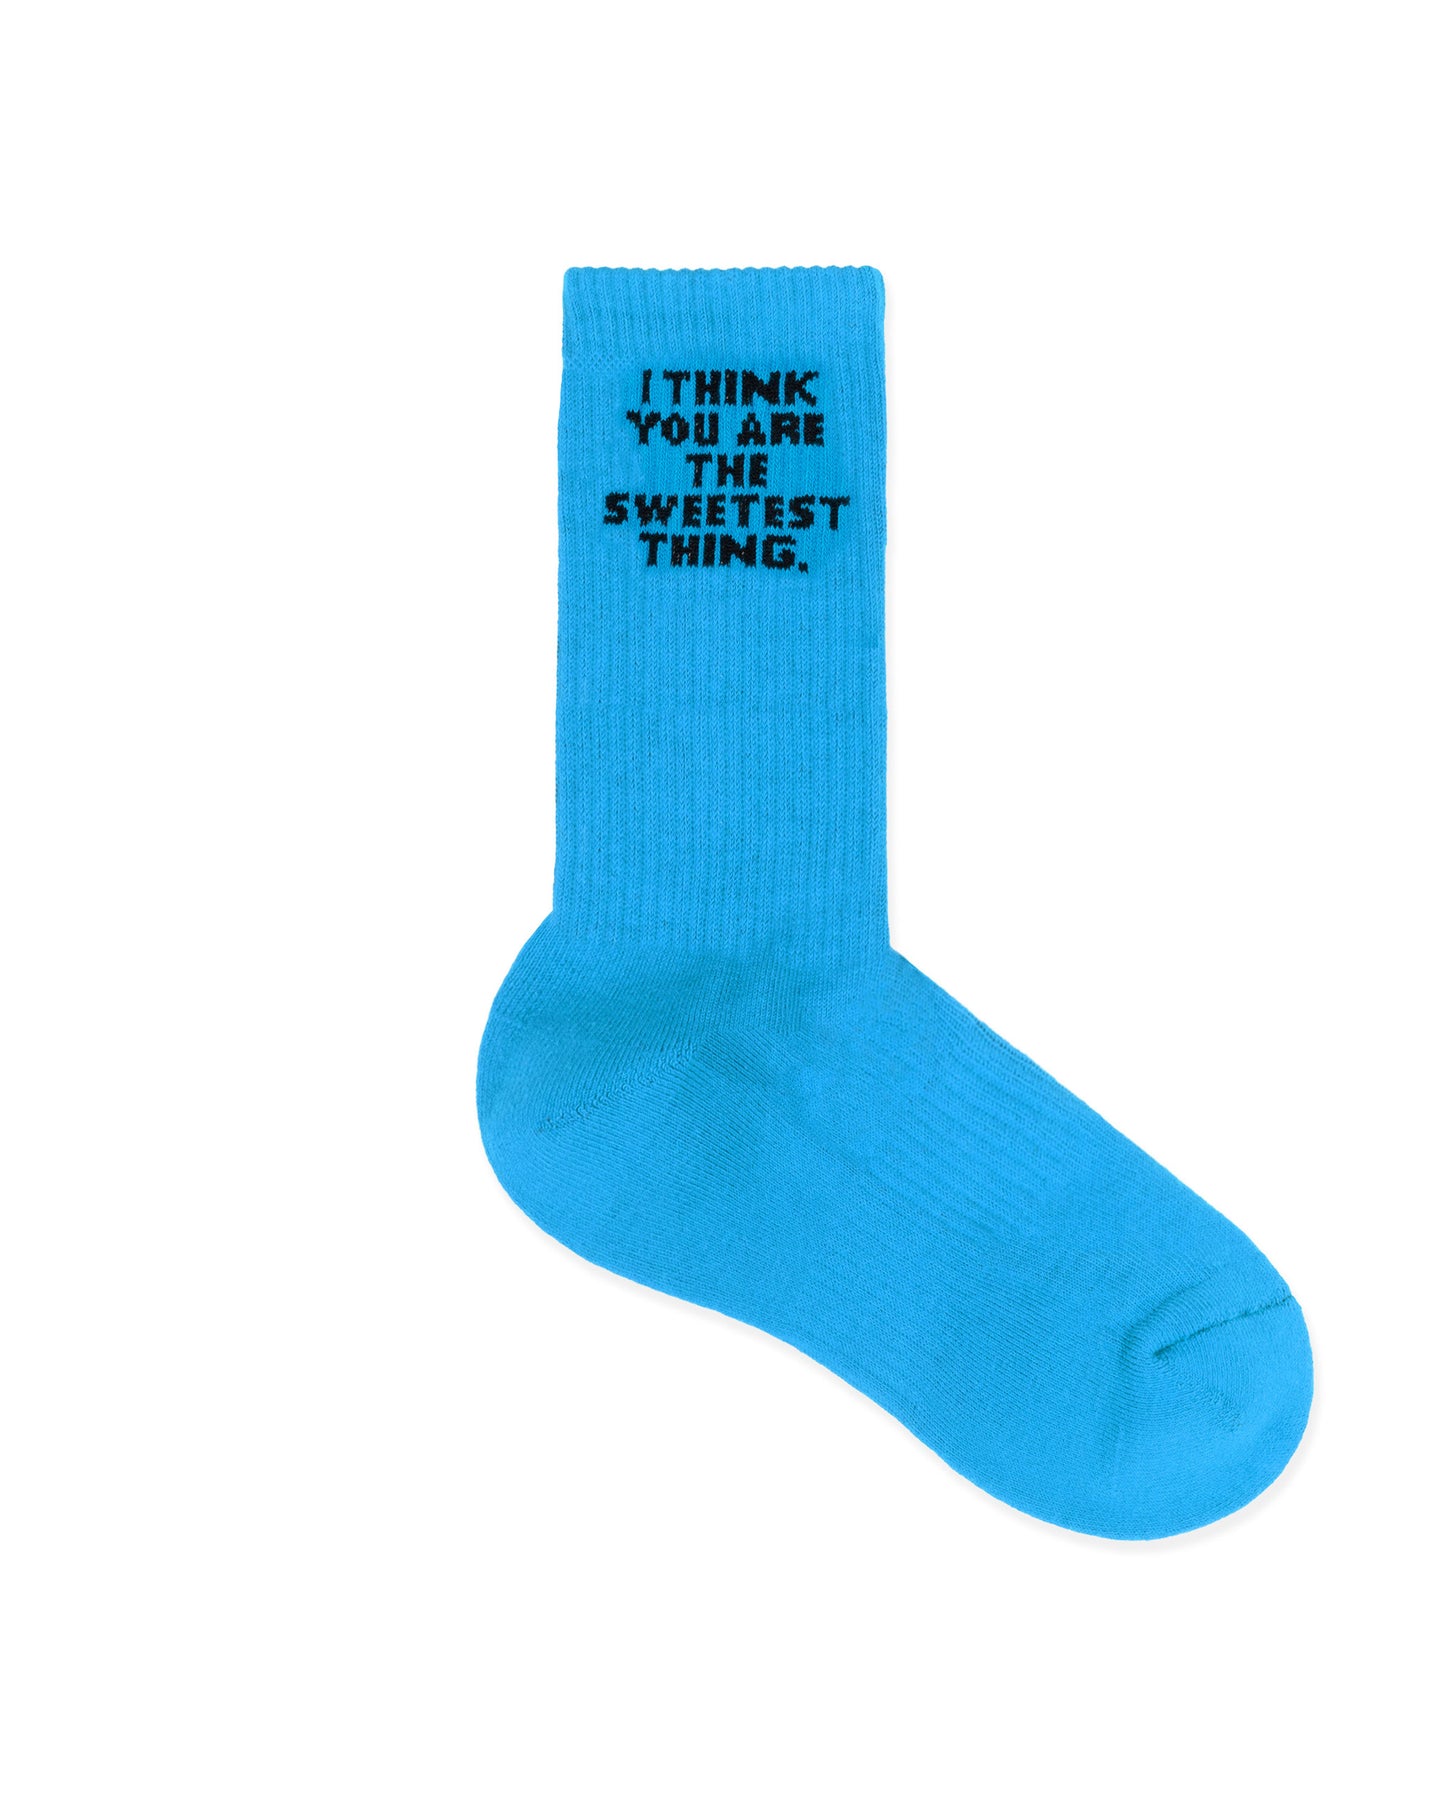 Levents® Quote Socks/ Blue